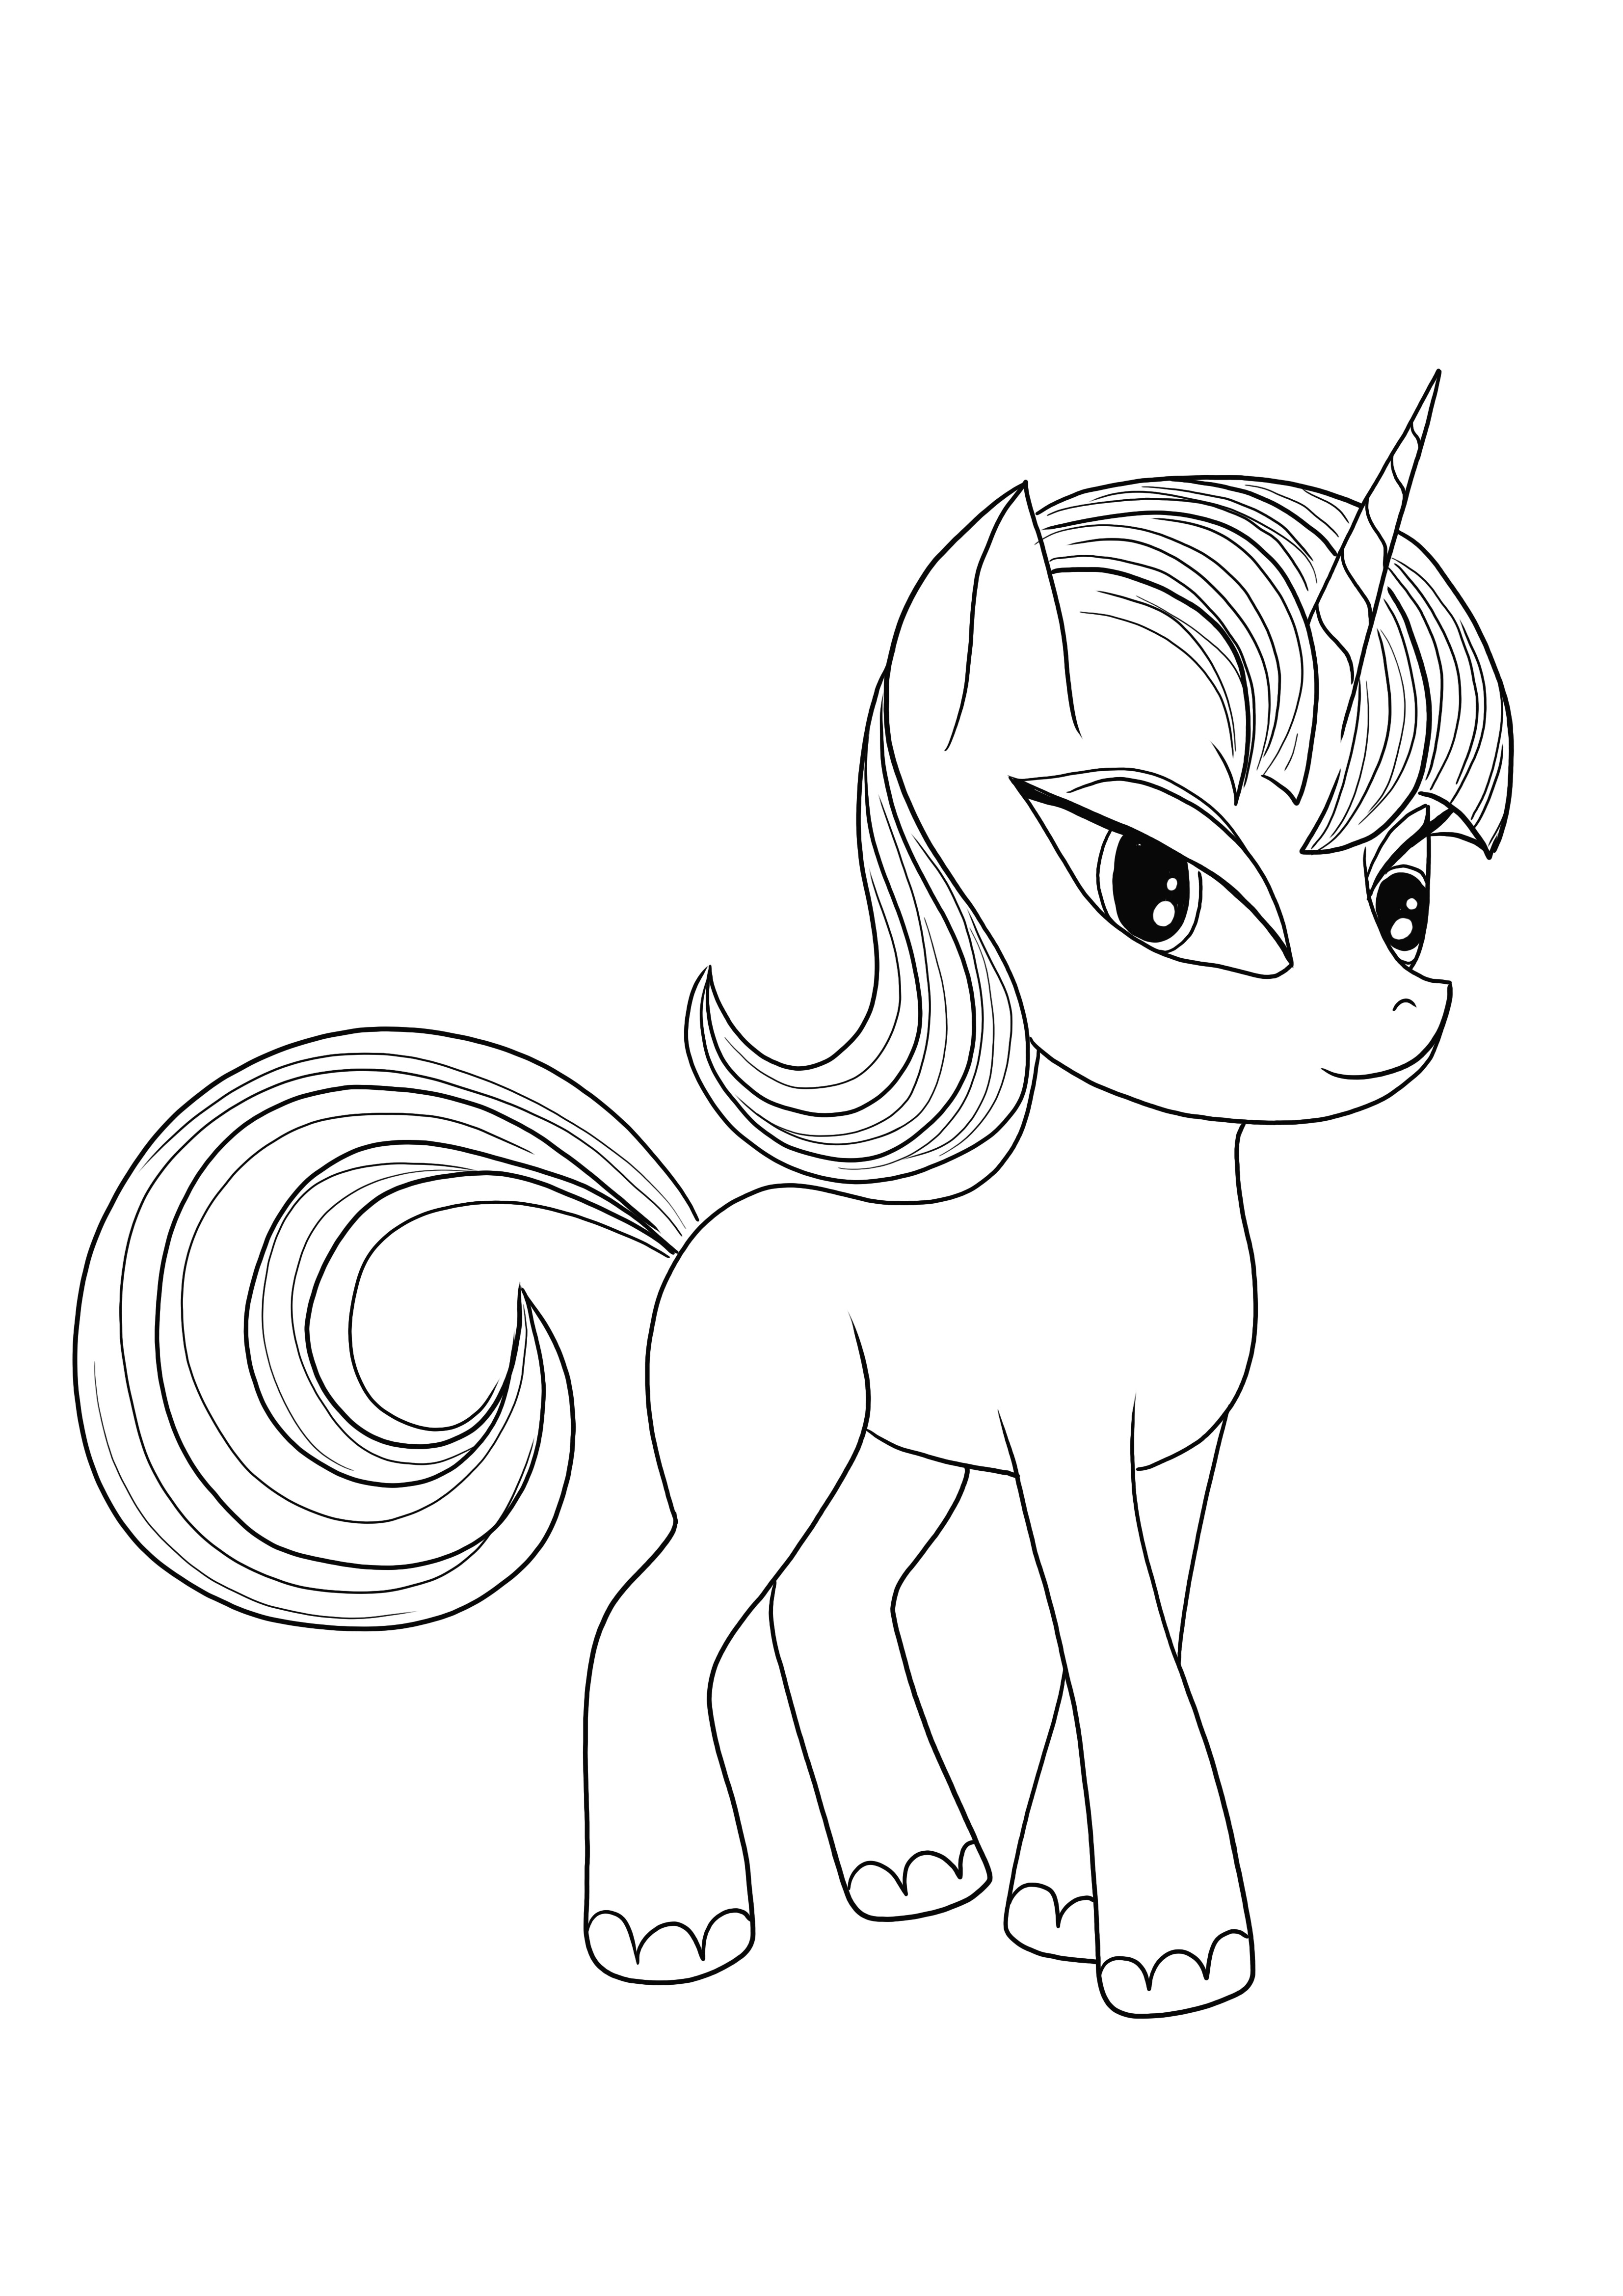 Cute Little Pony Unicorn free coloring and printing for kids of all ages